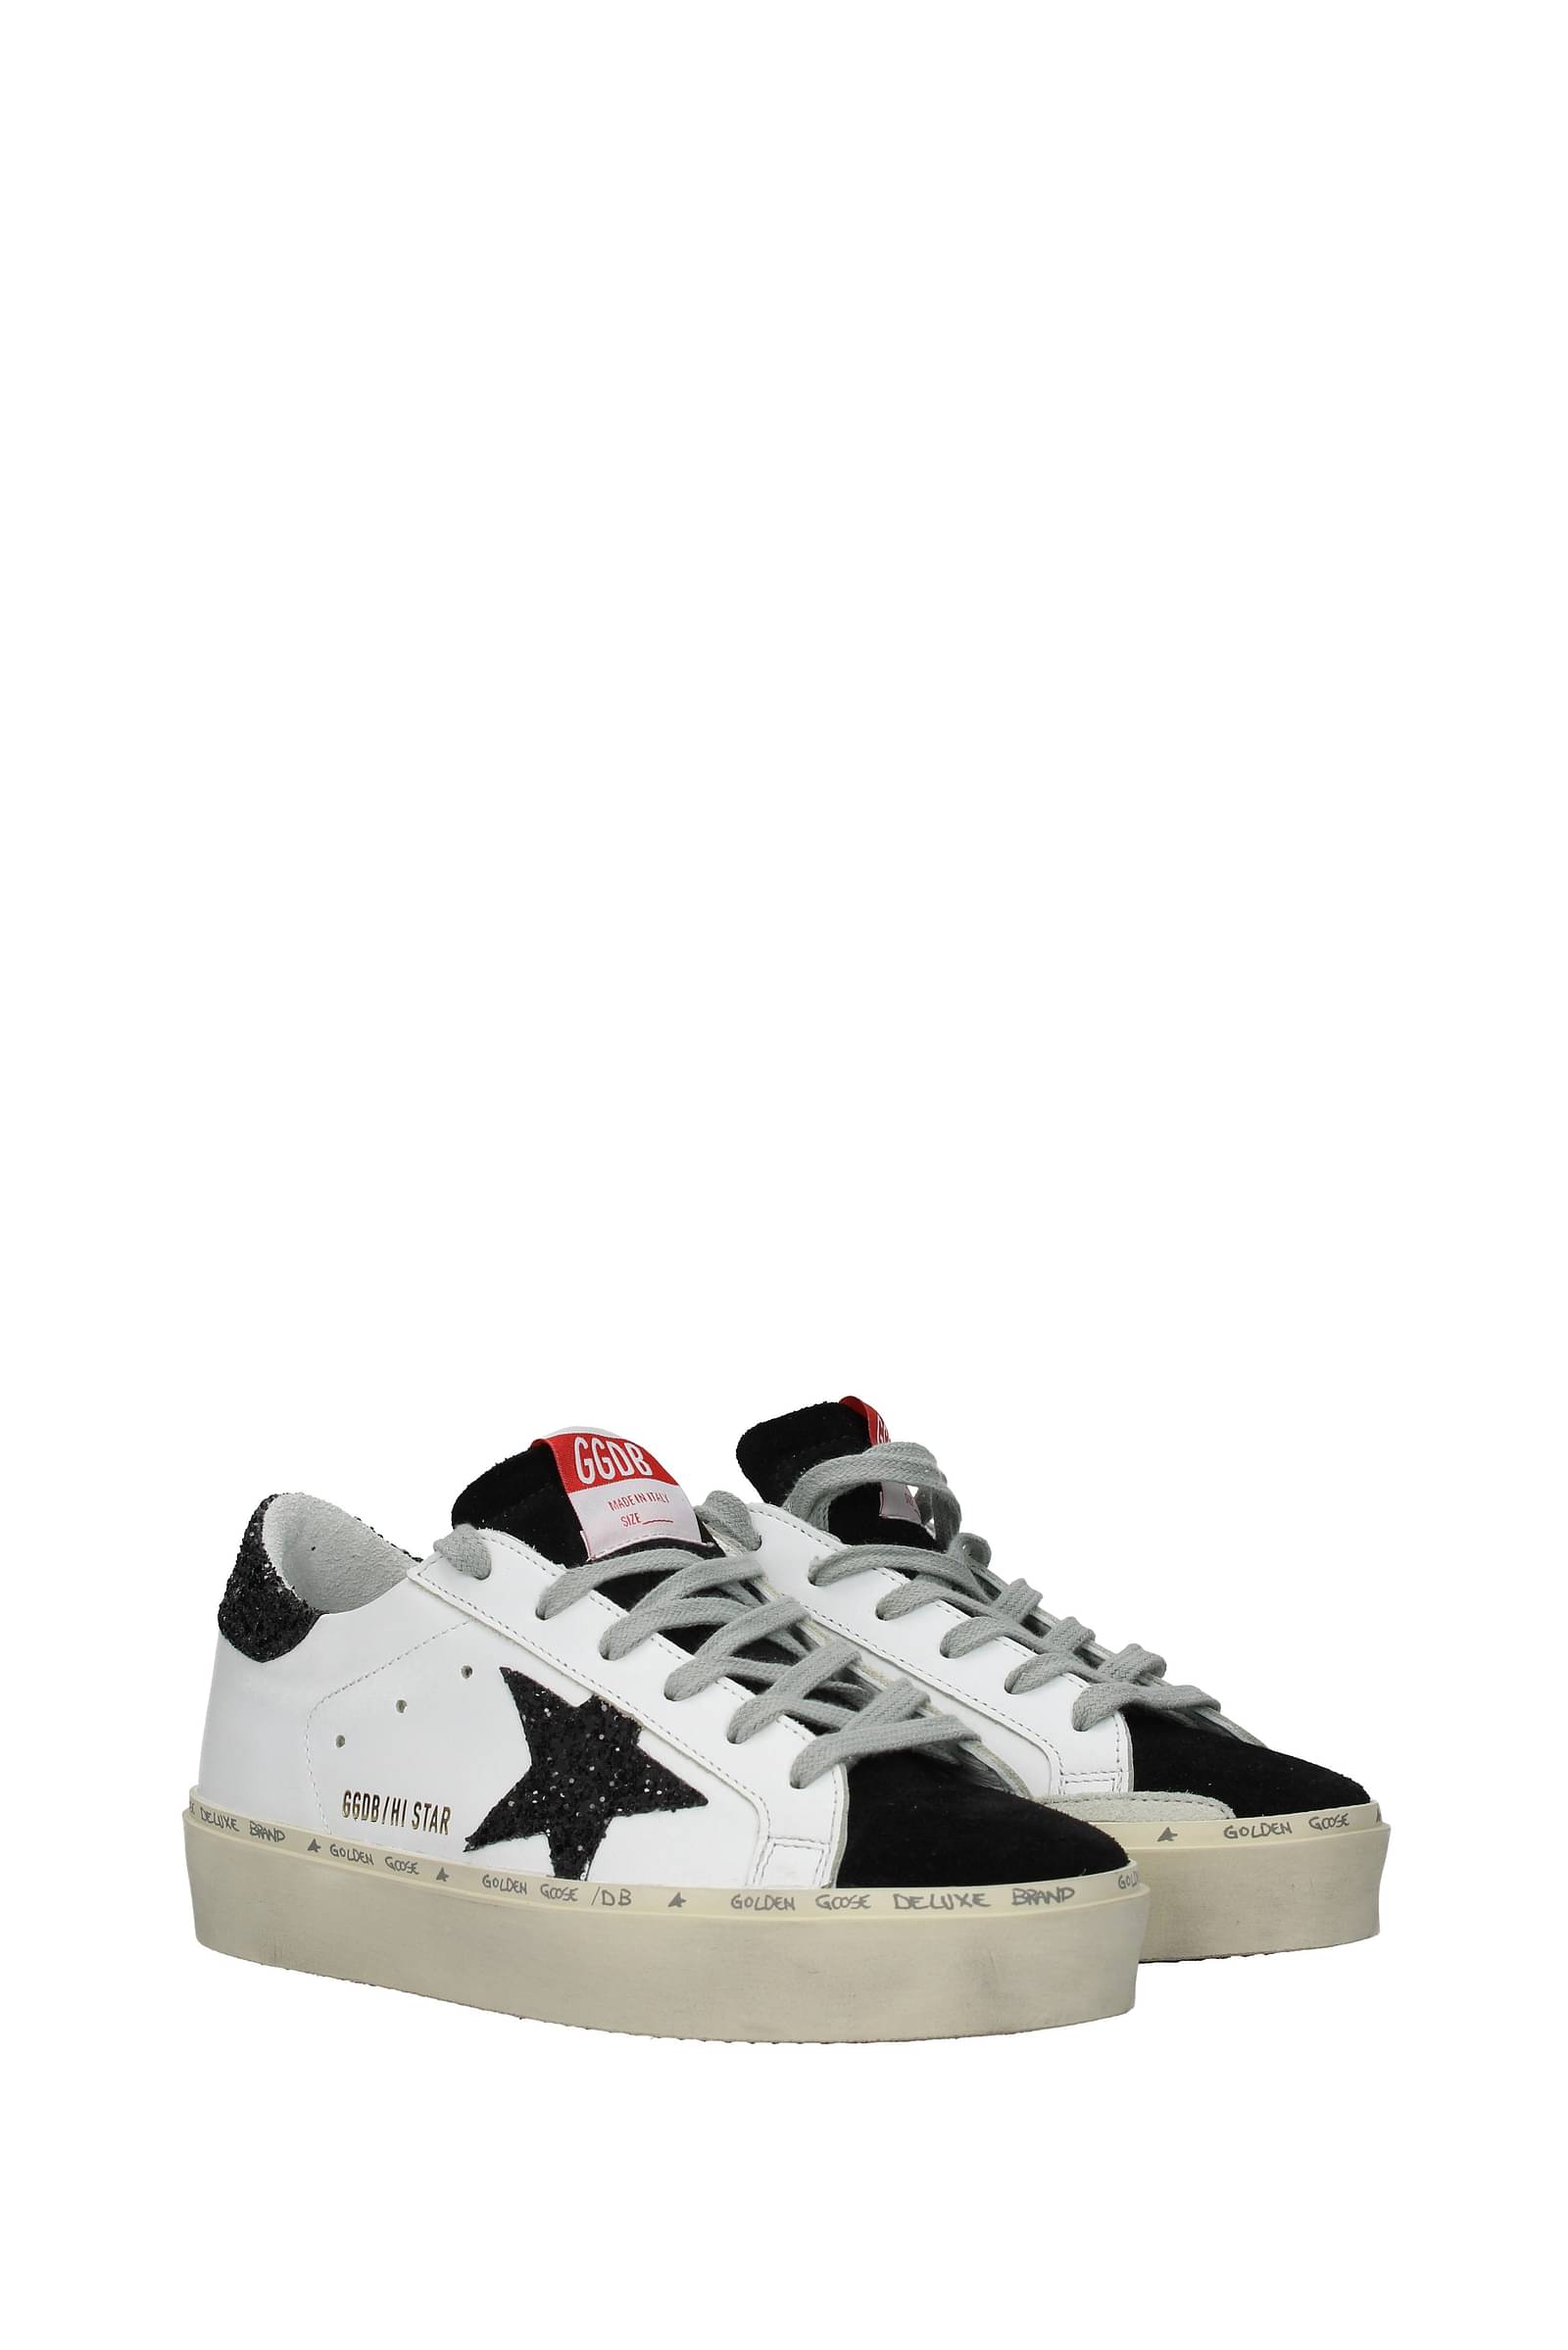 Golden Goose Sneakers hi star Women GWF00118F00017210229 Leather 344€